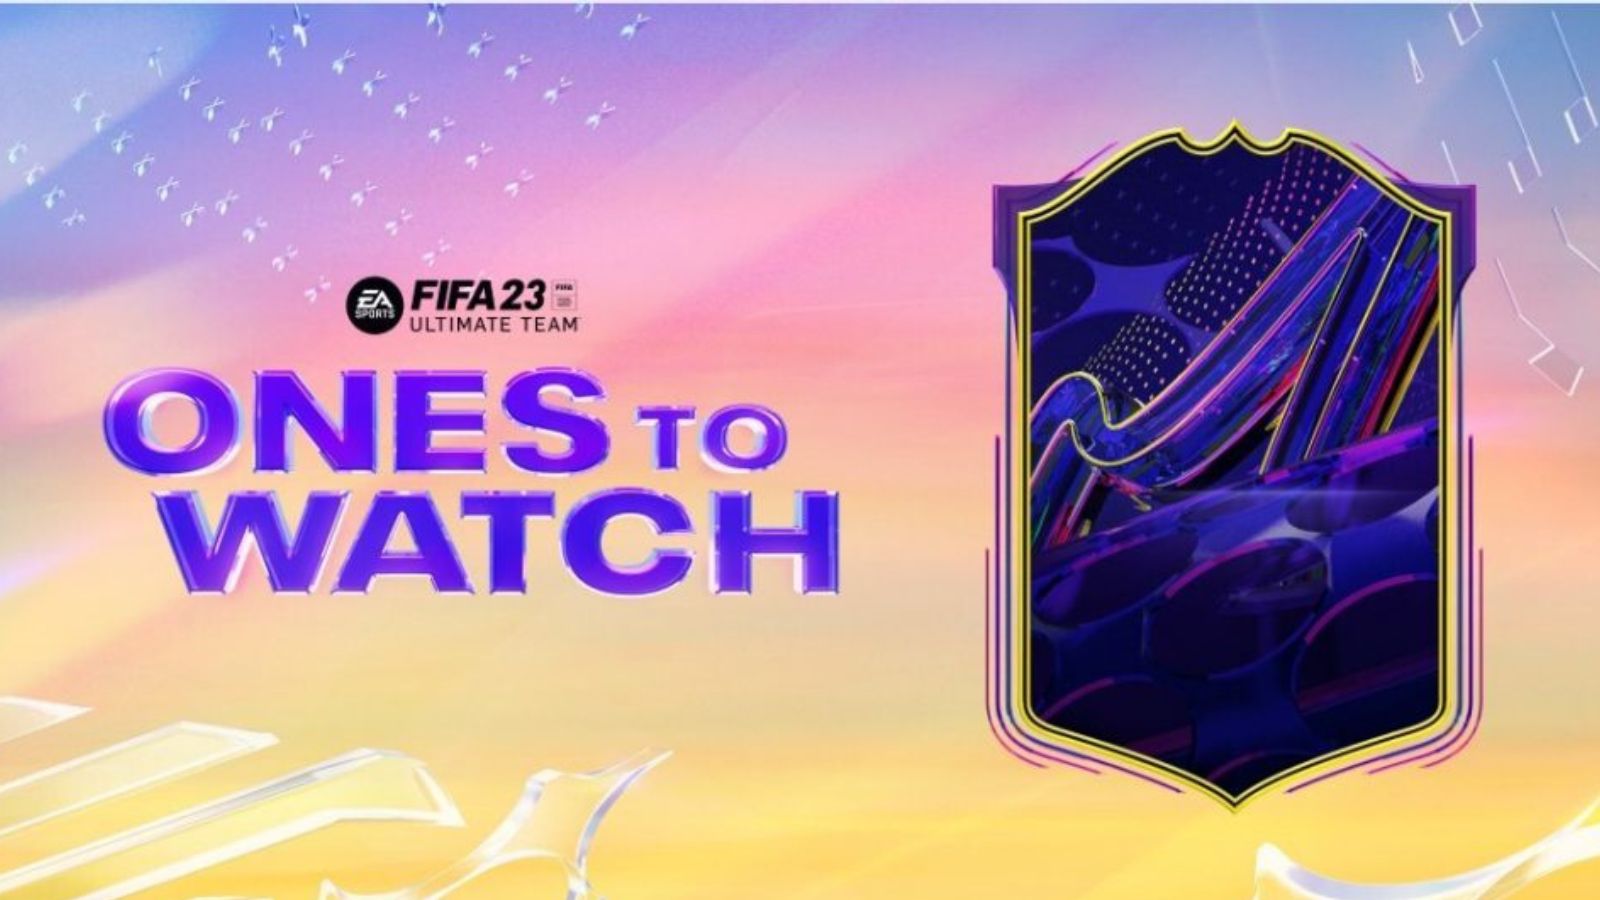 FIFA 23 Ones to Watch tracker: All confirmed OTW upgrades